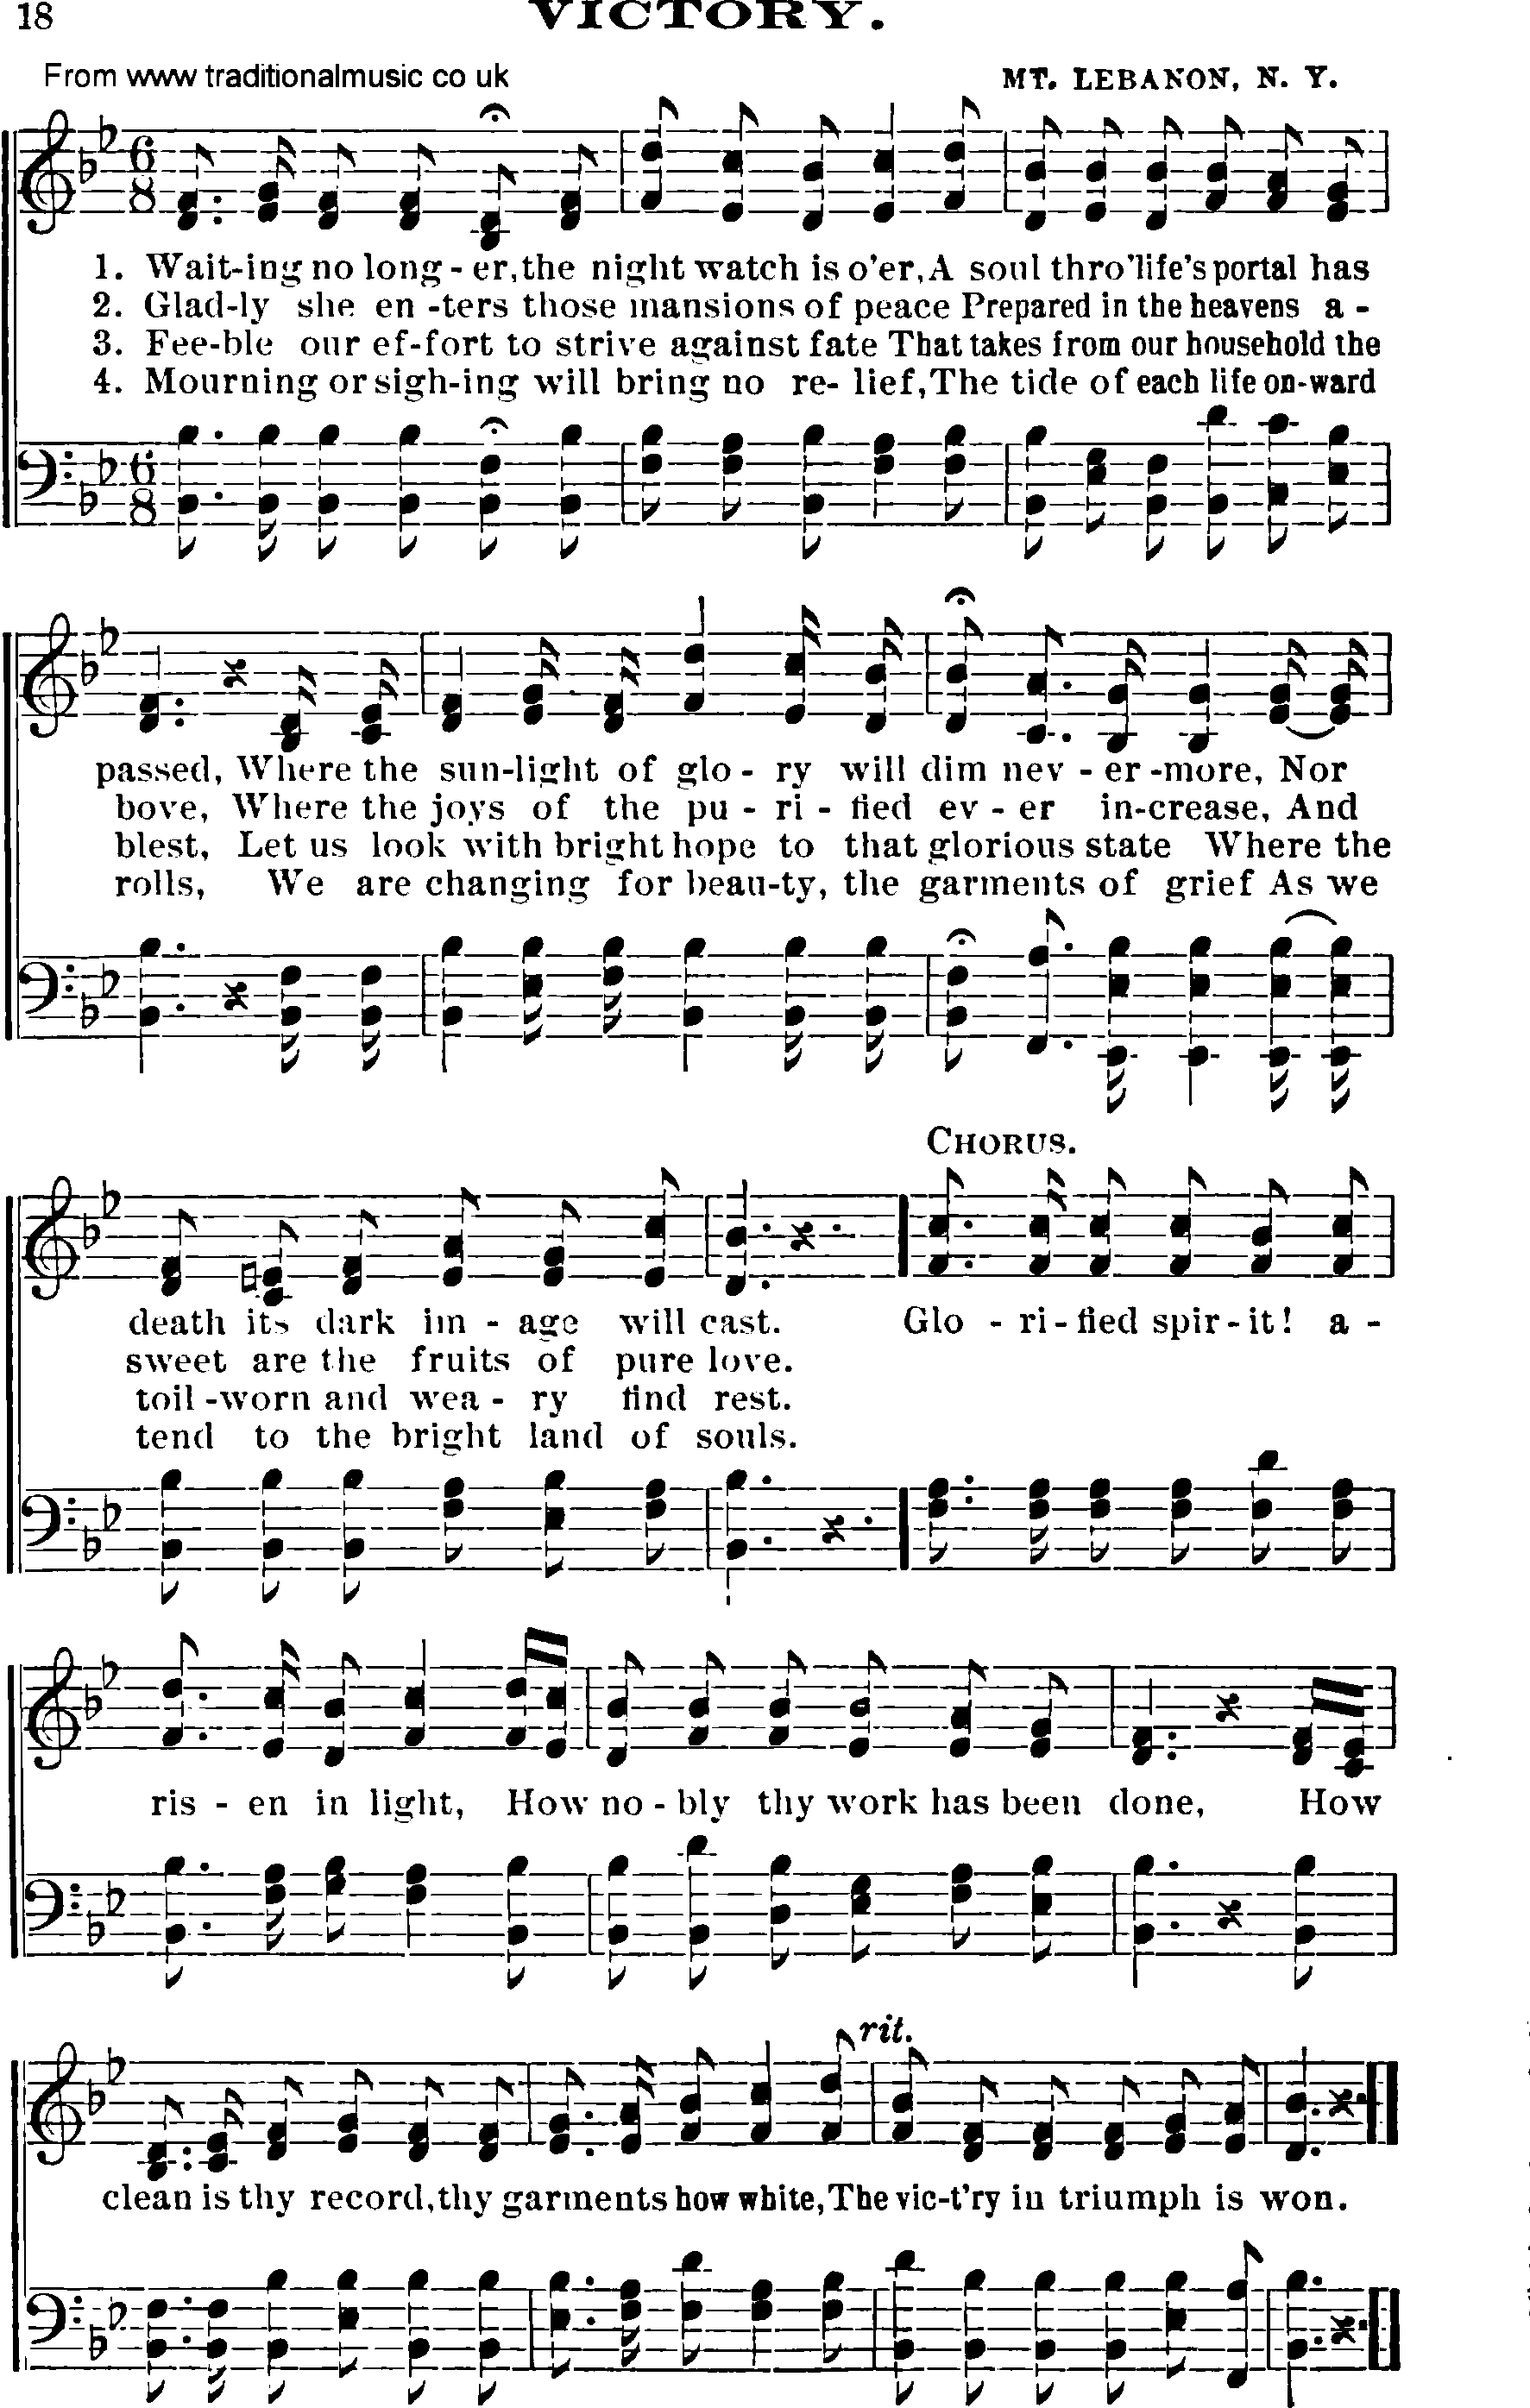 Shaker Music collection, Hymn: victory, sheetmusic and PDF